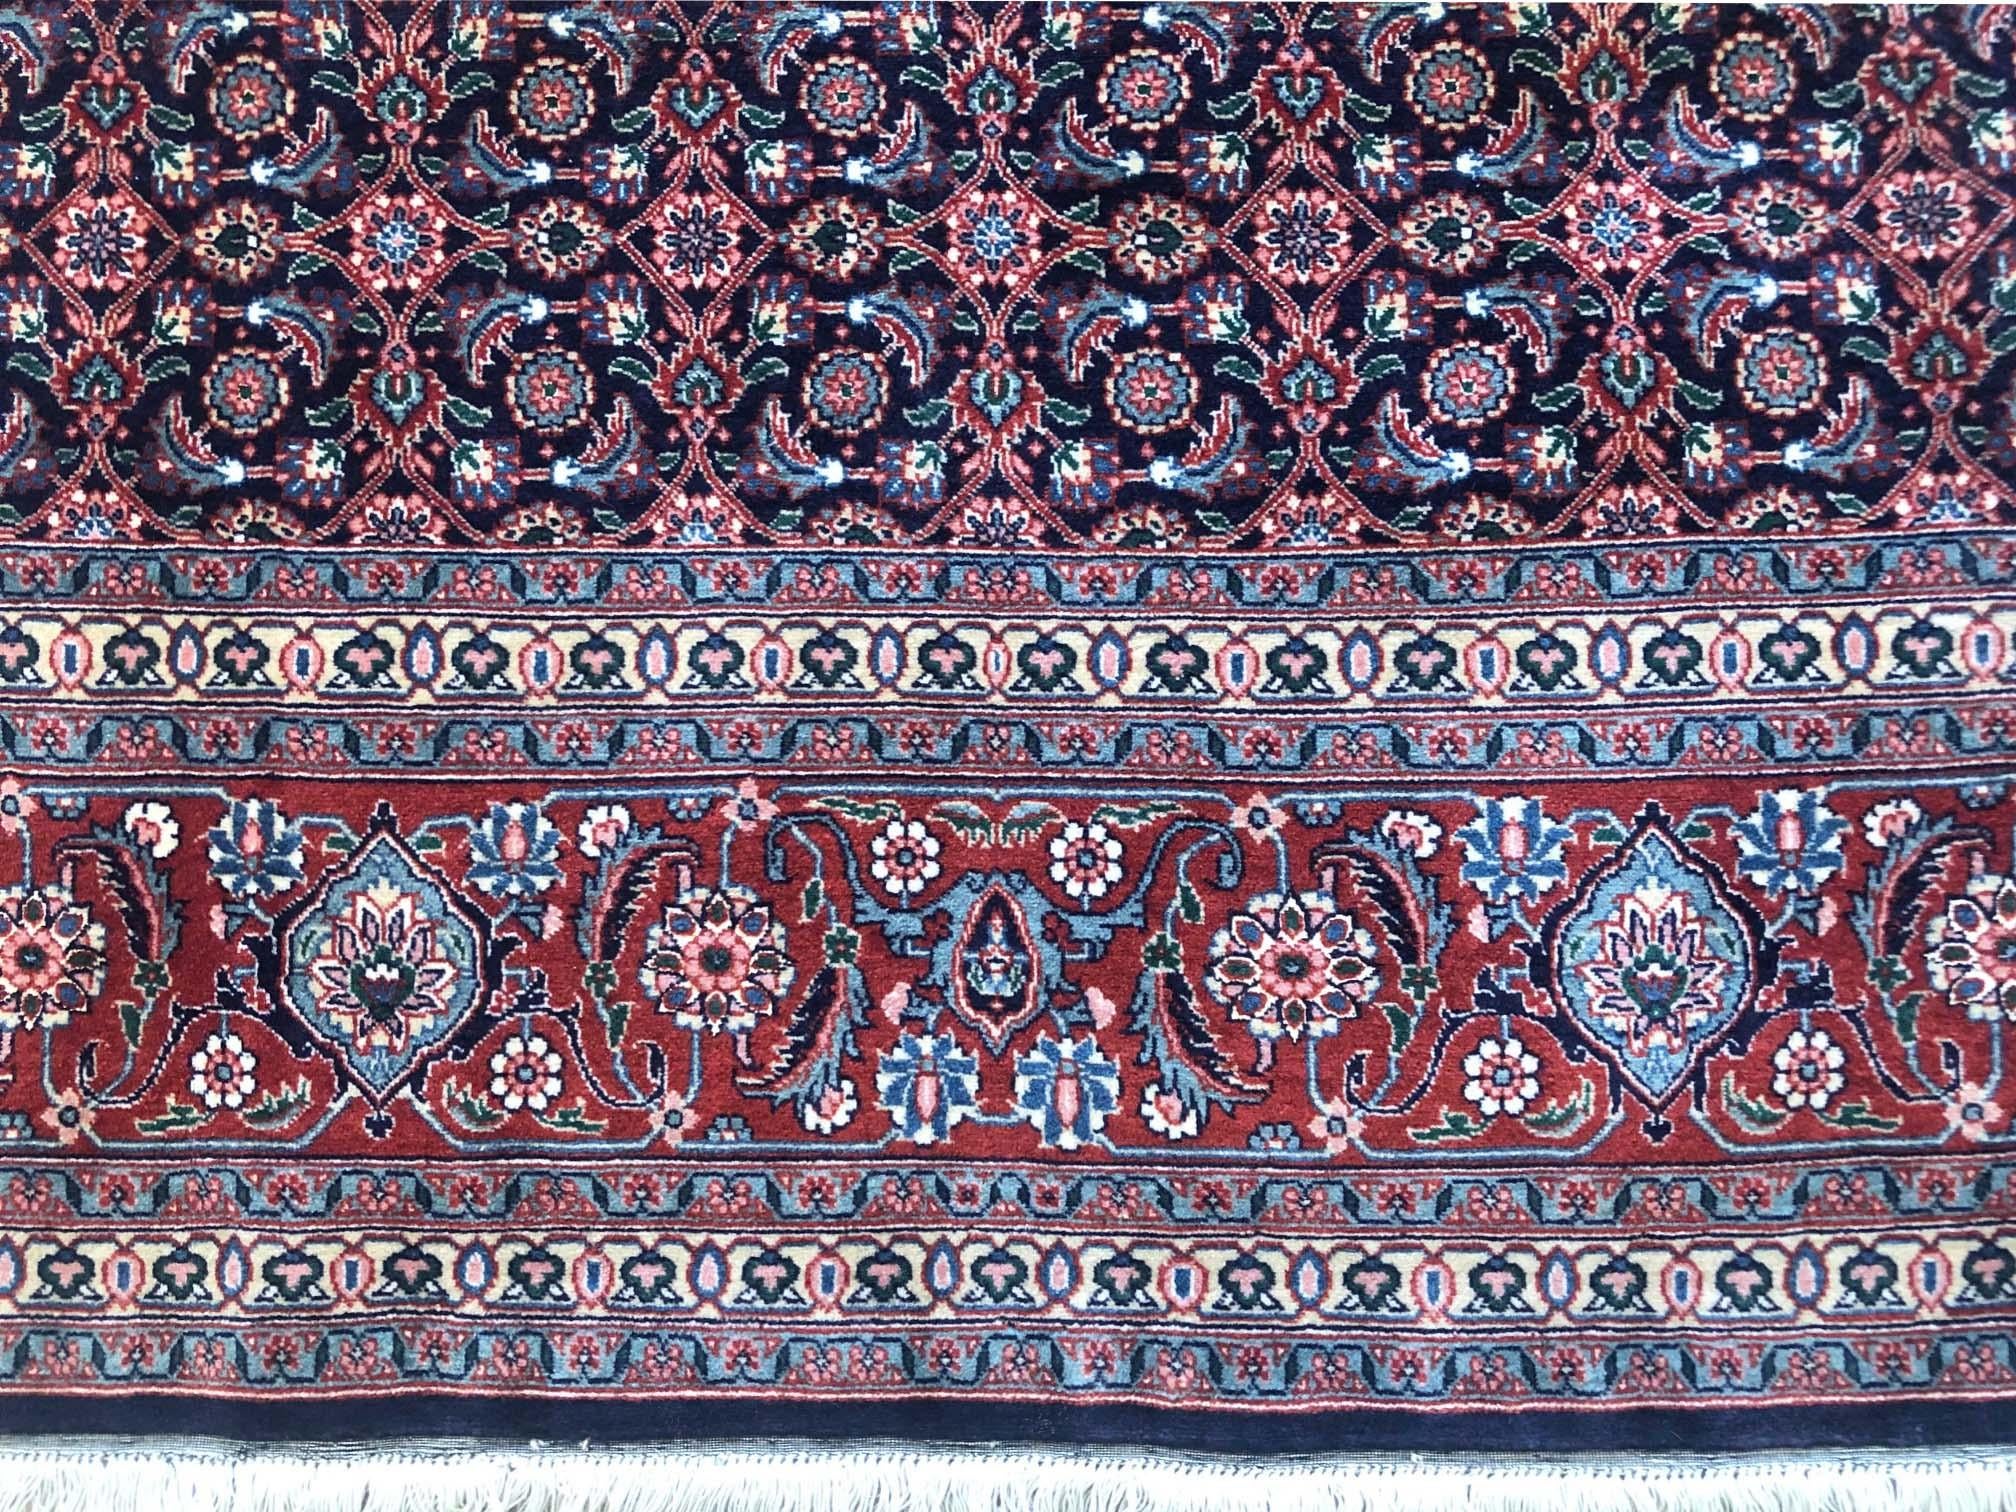 Persian Hand Knotted All-Over Herati Red Tabriz Runner Rug 3